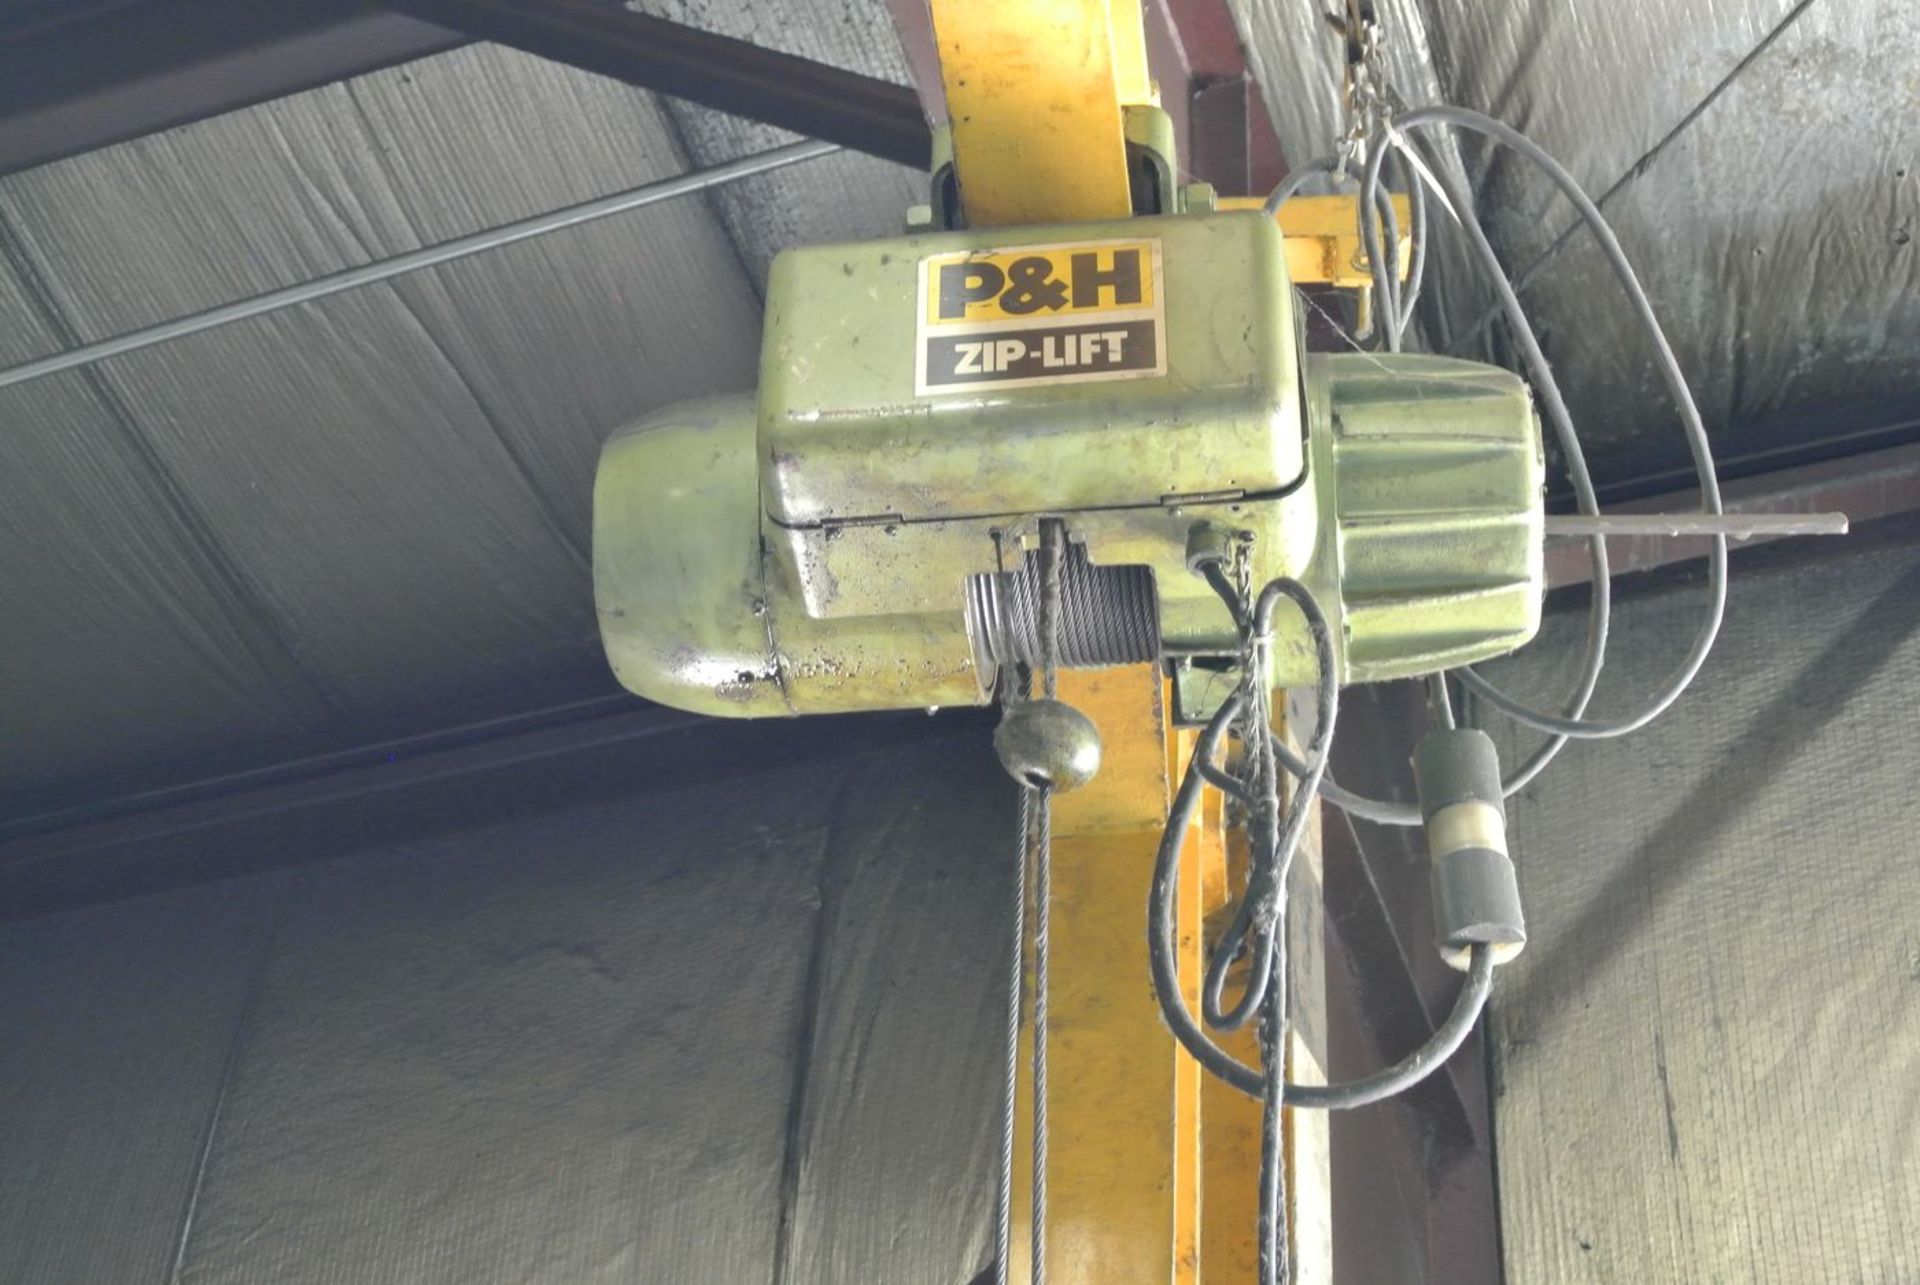 POMHI (Parkhill Overhead Material Handling Inc.) 1-Ton Post Mounted Jib Crane; with P & H Zip-Lift - Image 2 of 3